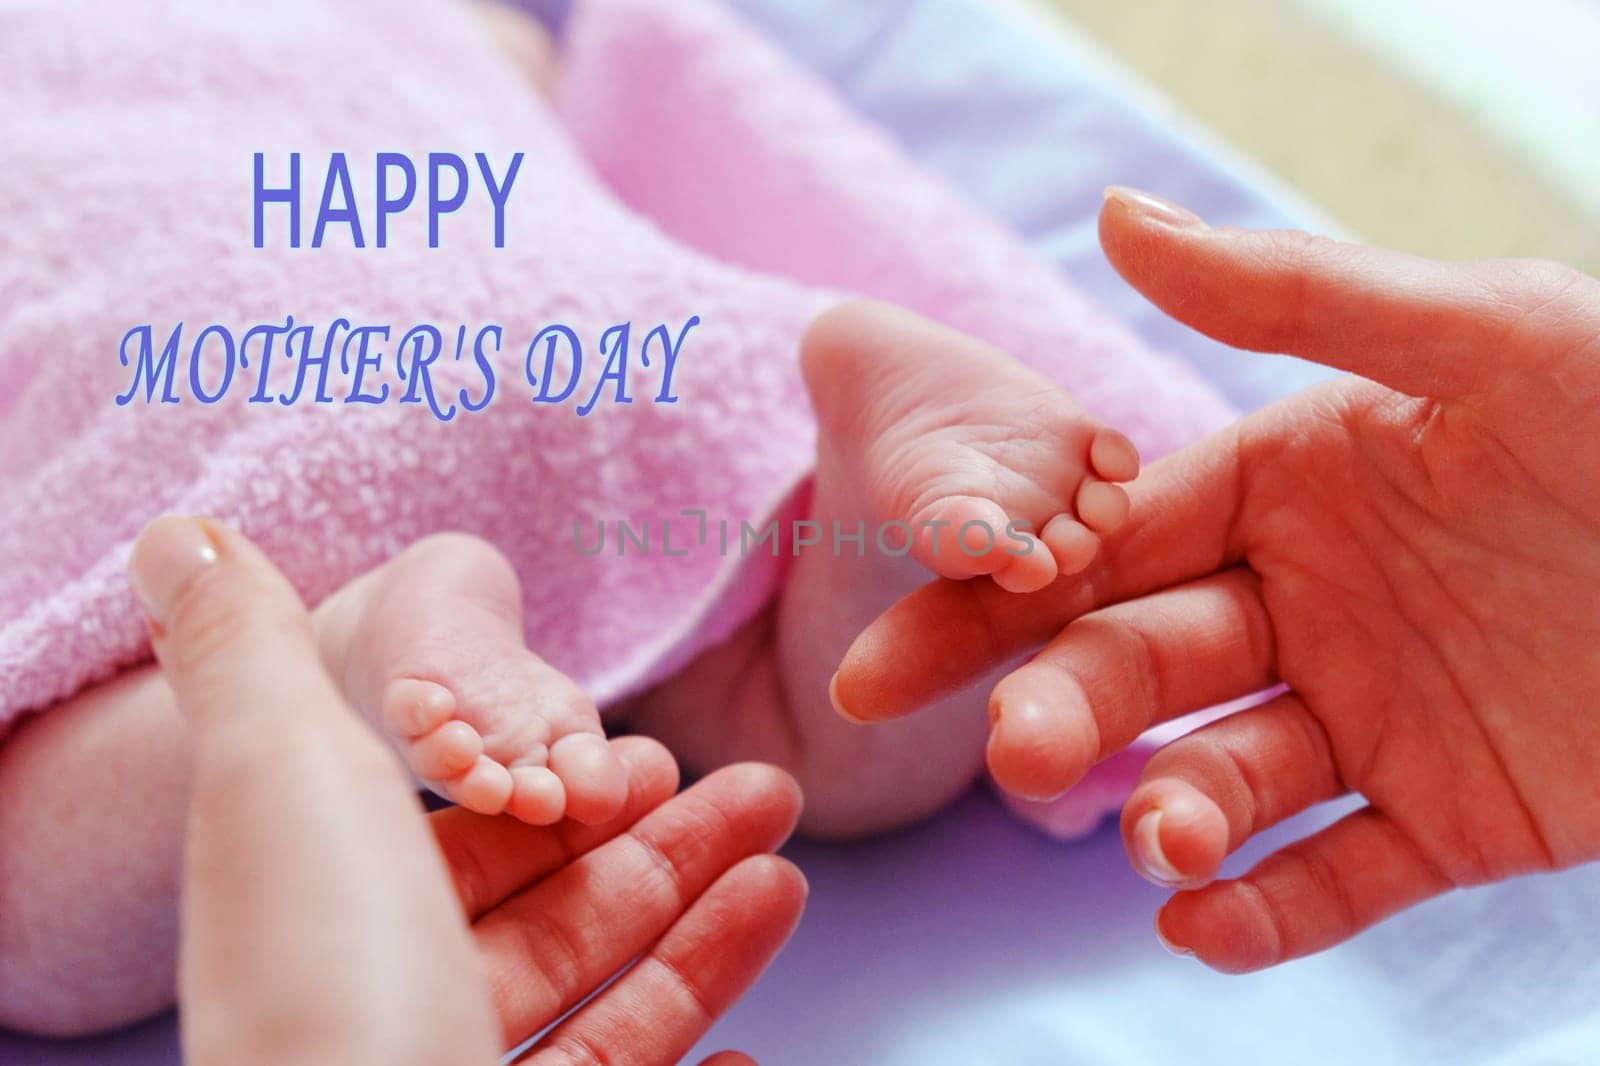 Celebrating the Tender Bond of Love on Mothers Day With a Newborns Touch